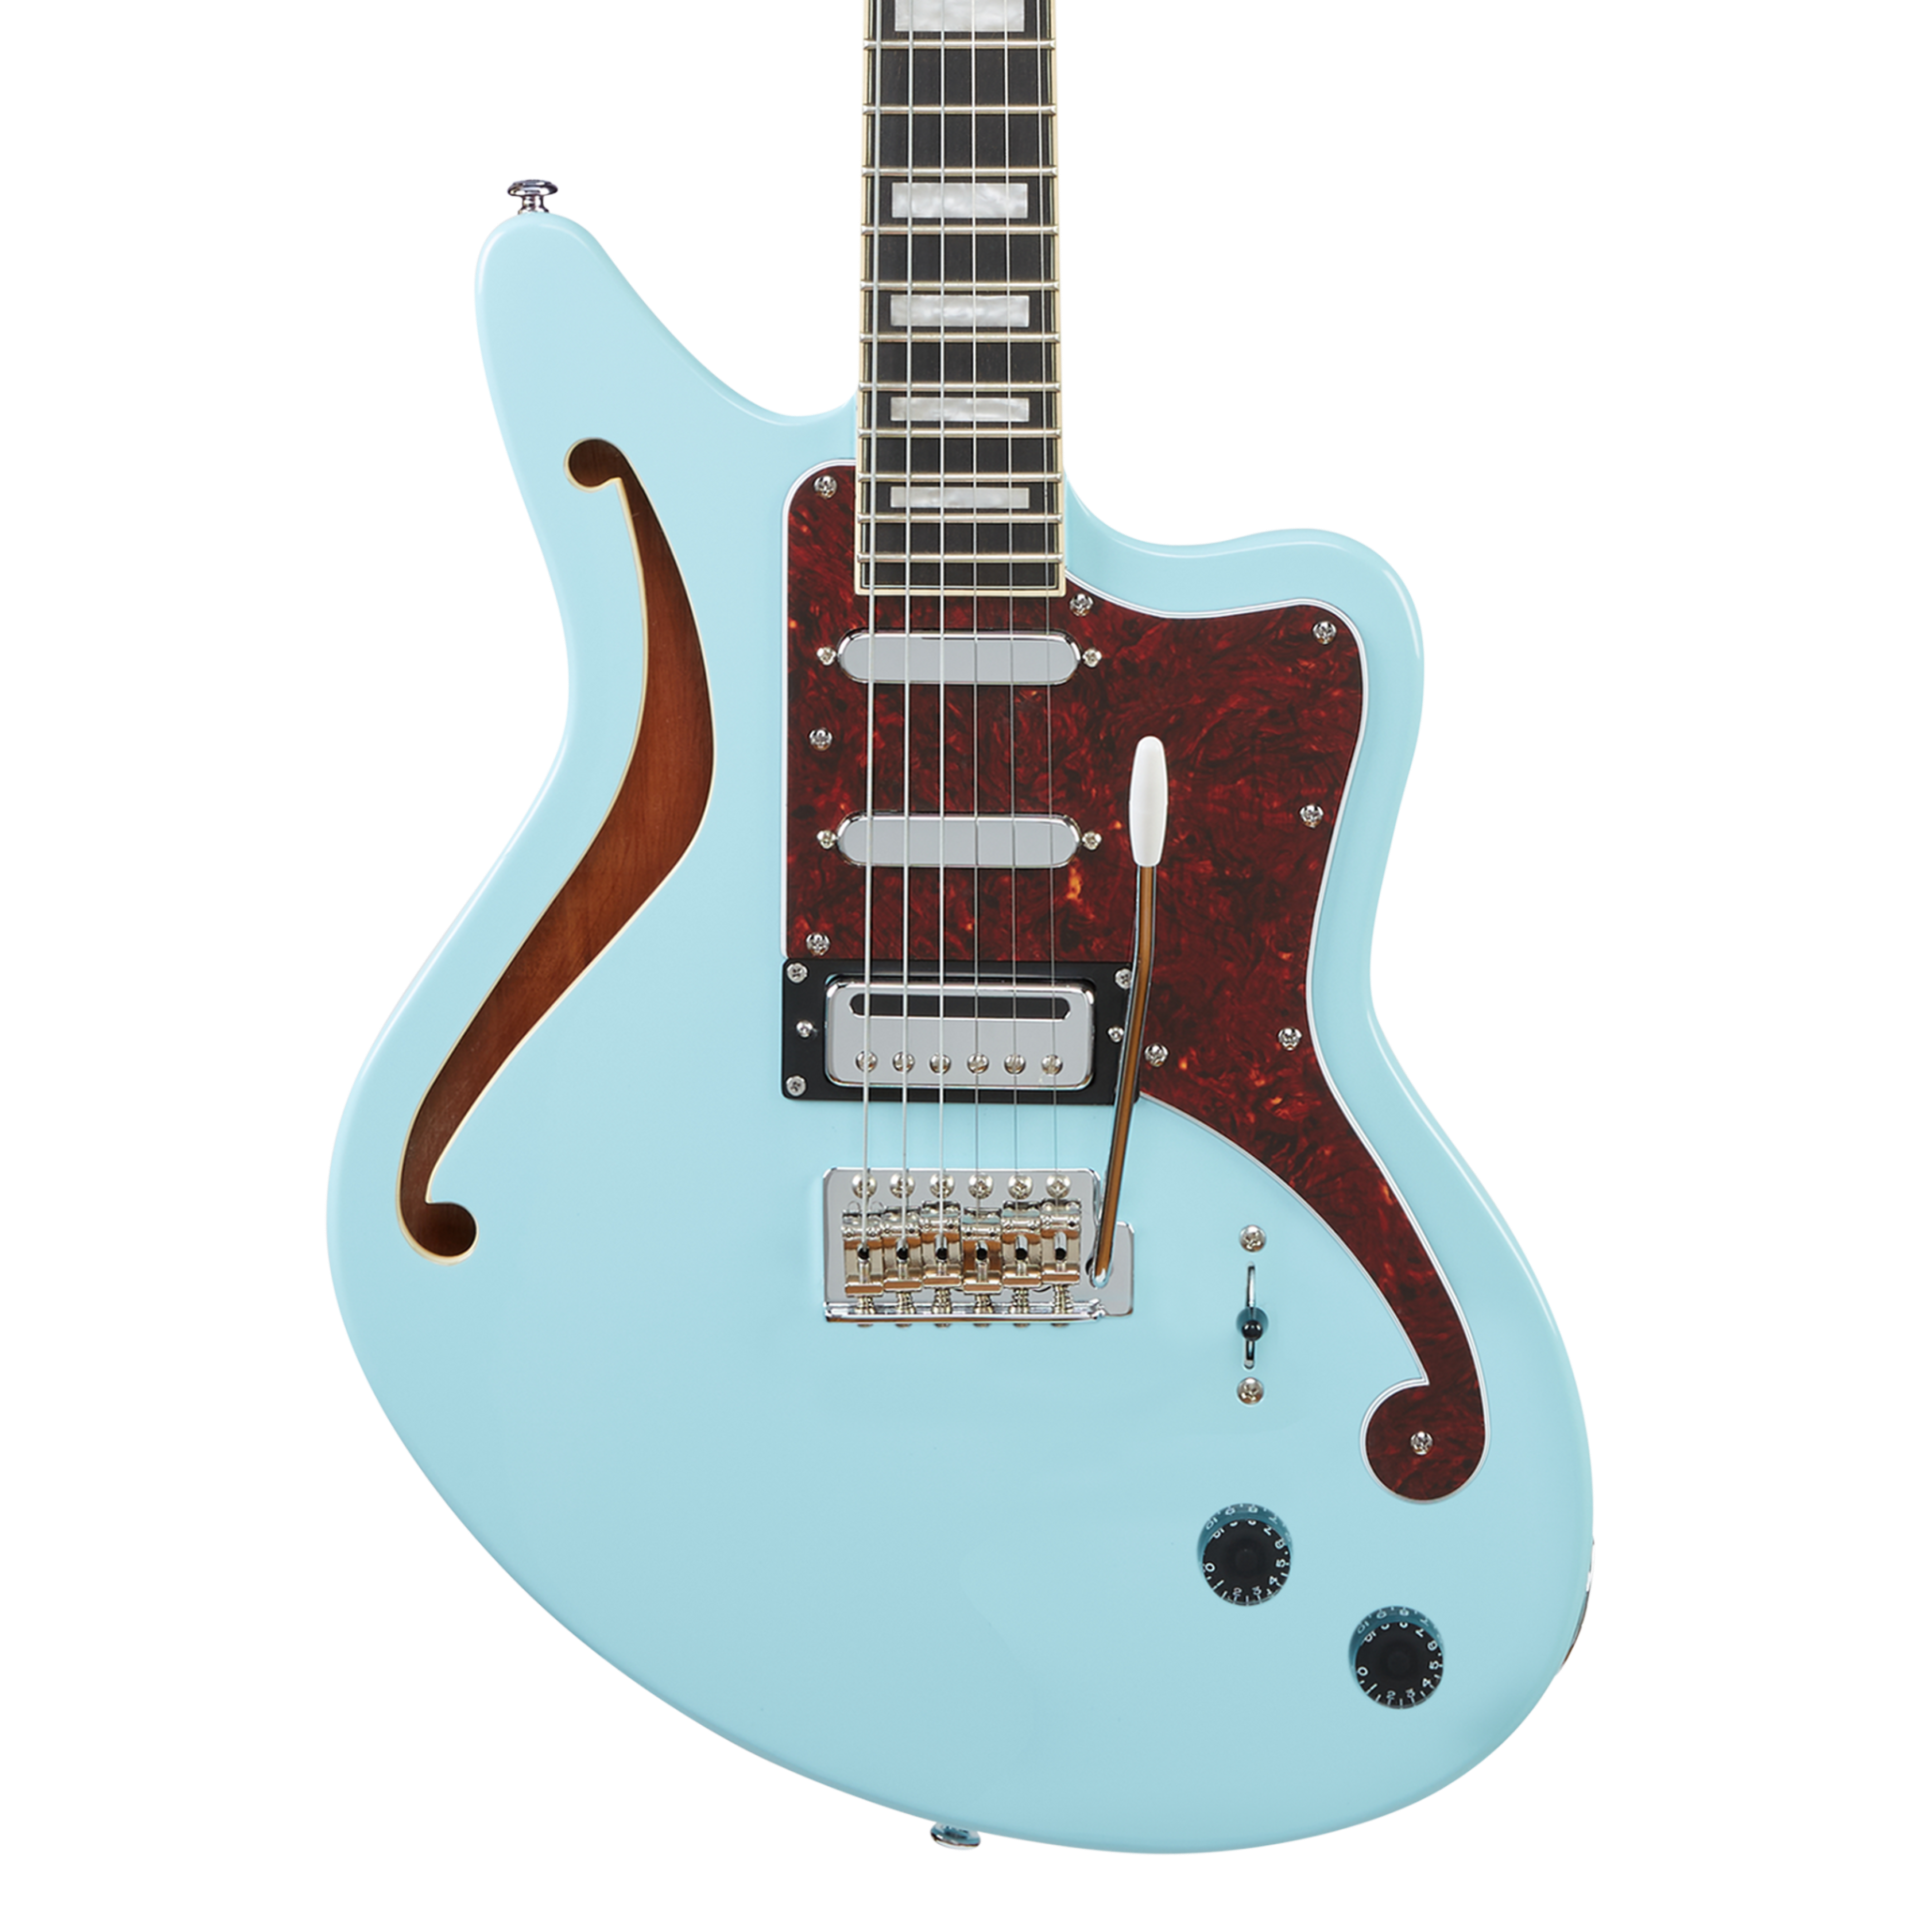 D’angelico Premier Bedford SH Semi Hollow Electric Guitar in Sky Trem Blue